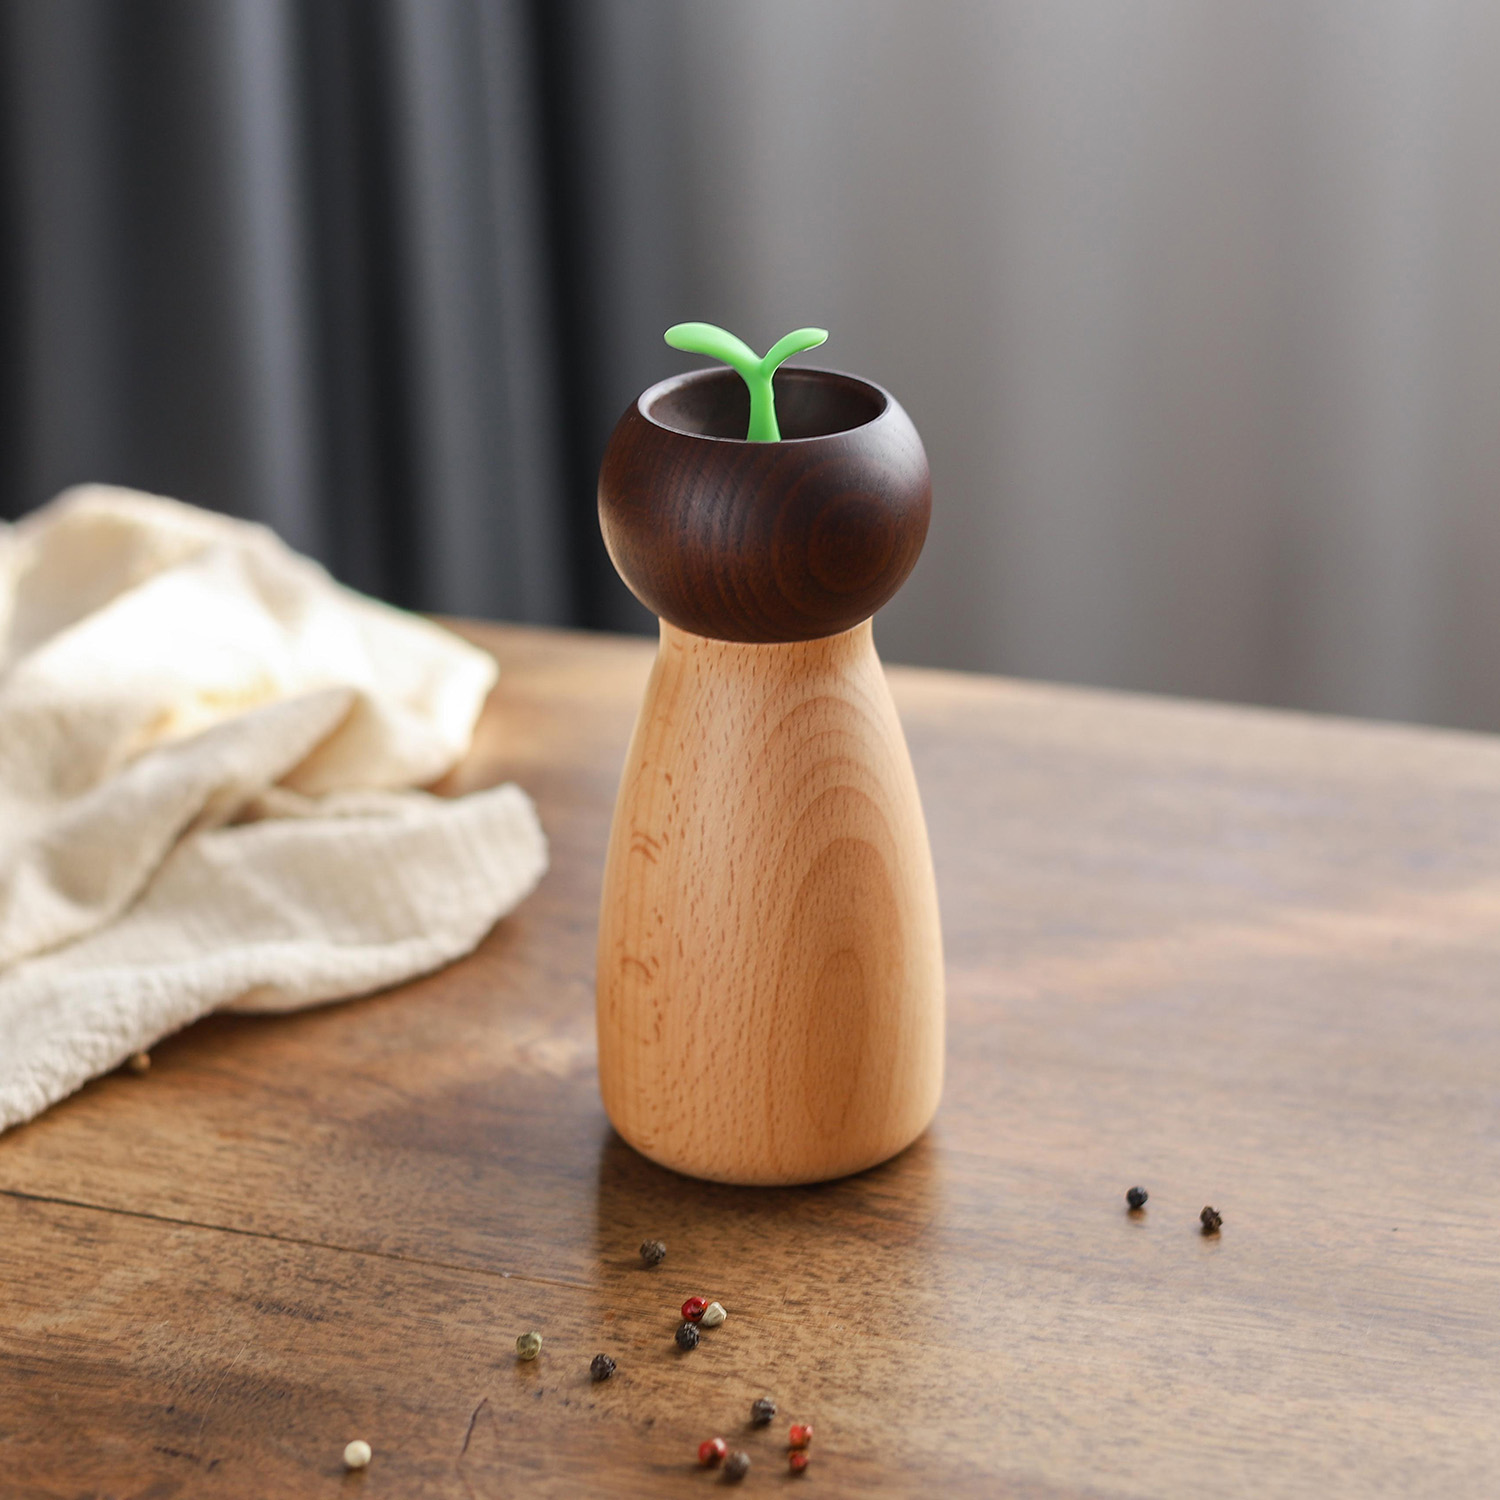 Innovative Thumb Press Pepper Grinder: A Must-Have Kitchen Tool